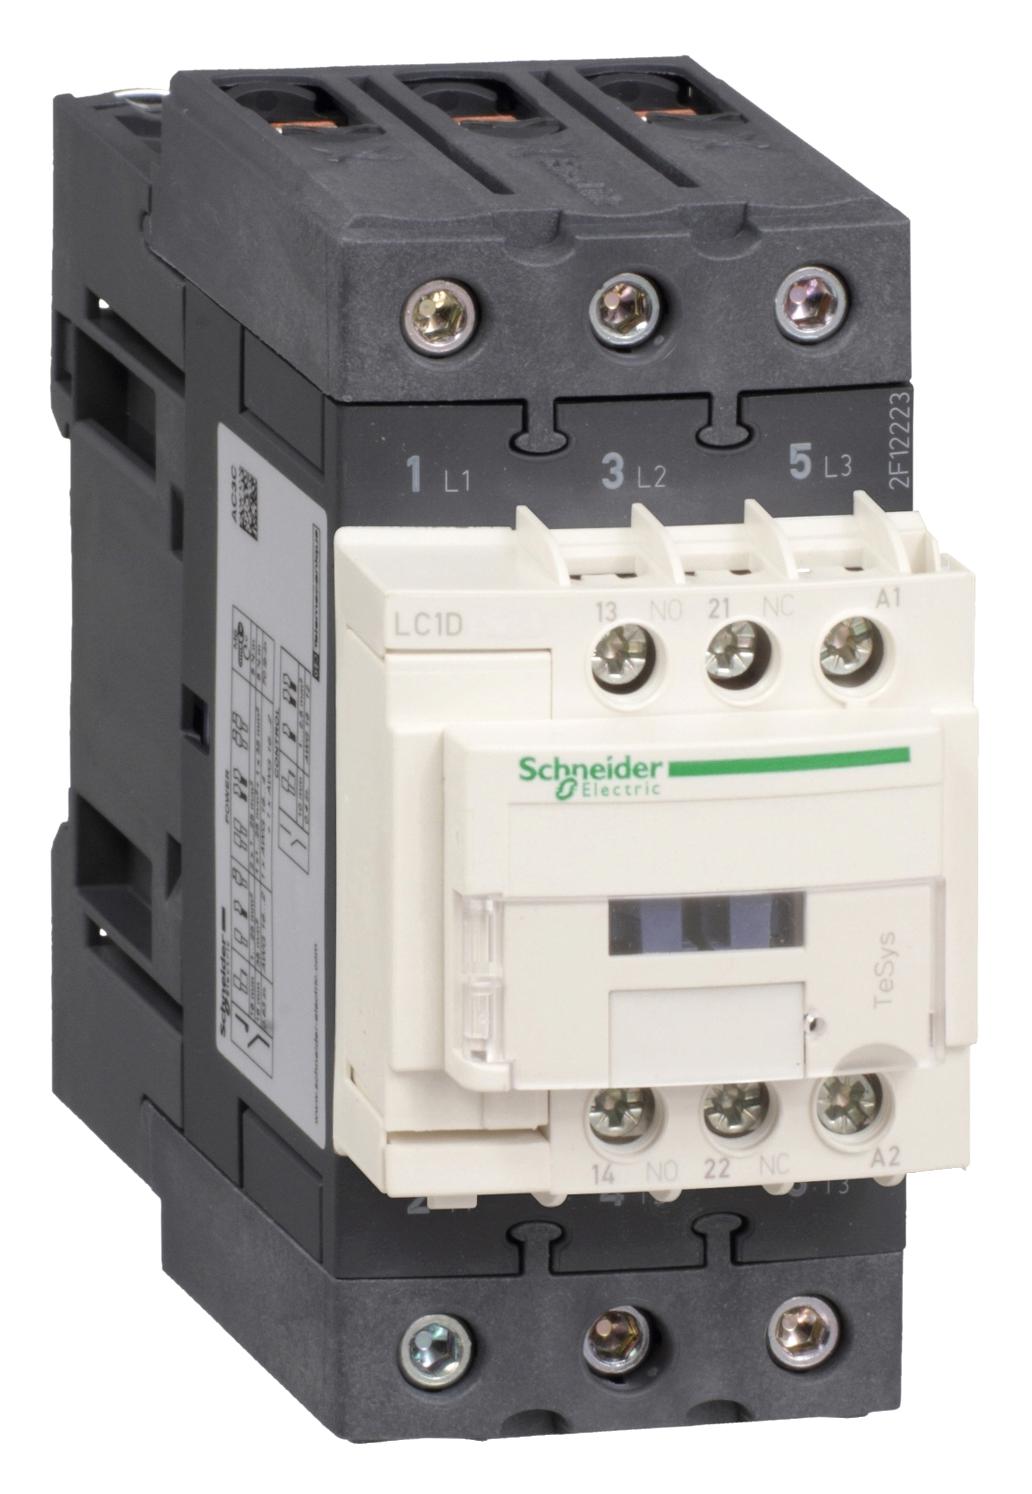 LC1D65AE7 CONTACTOR, 3PST-NO, 48VAC, DINRAIL/PANEL SCHNEIDER ELECTRIC